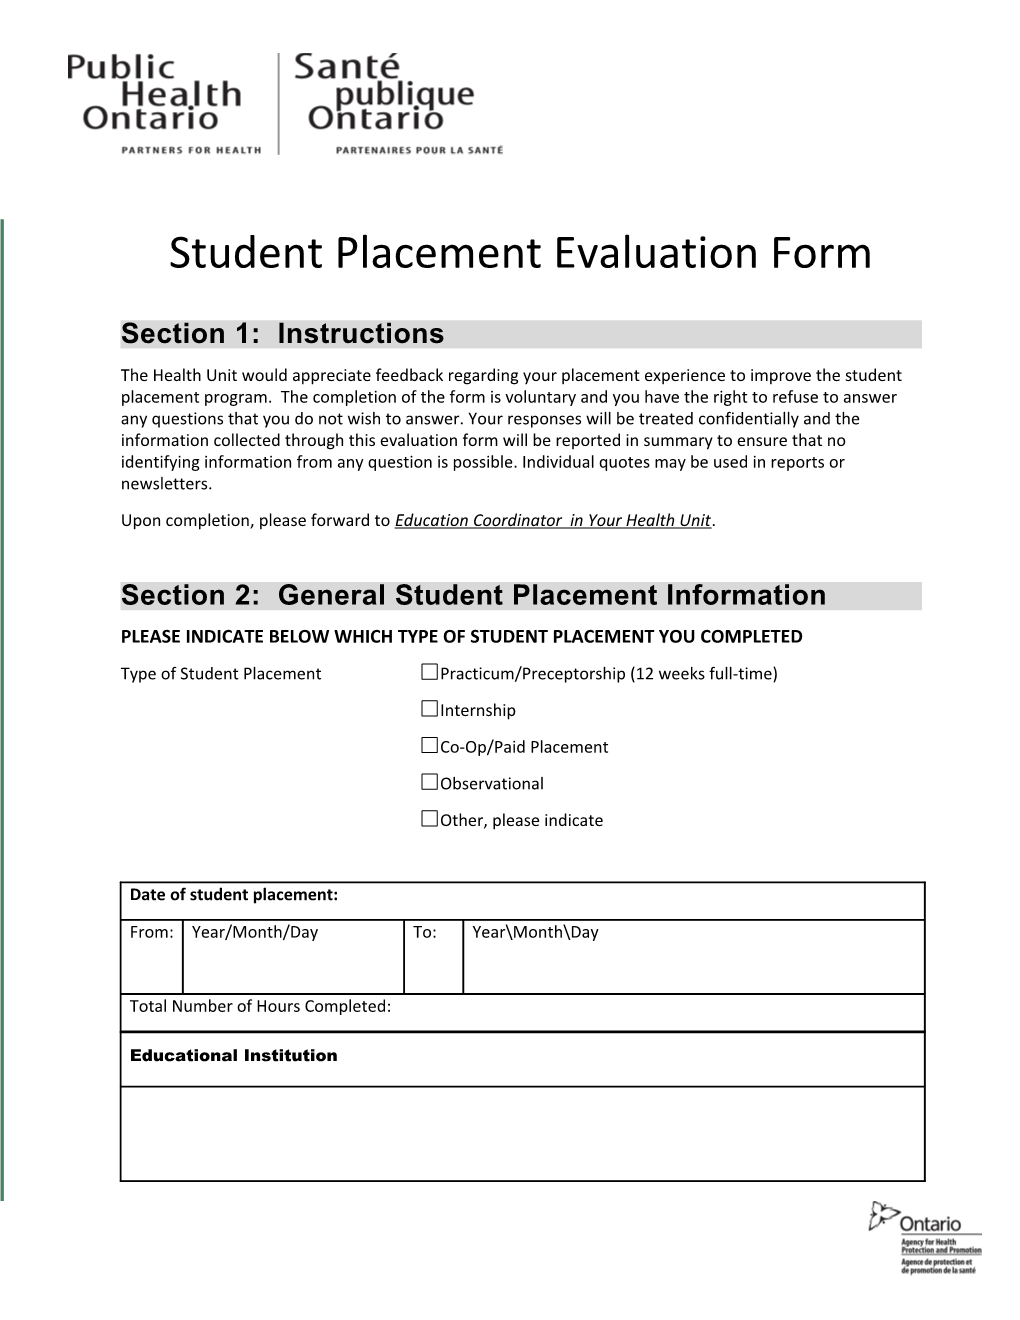 SPEP Resource Library: Student Placement Evaluation Form